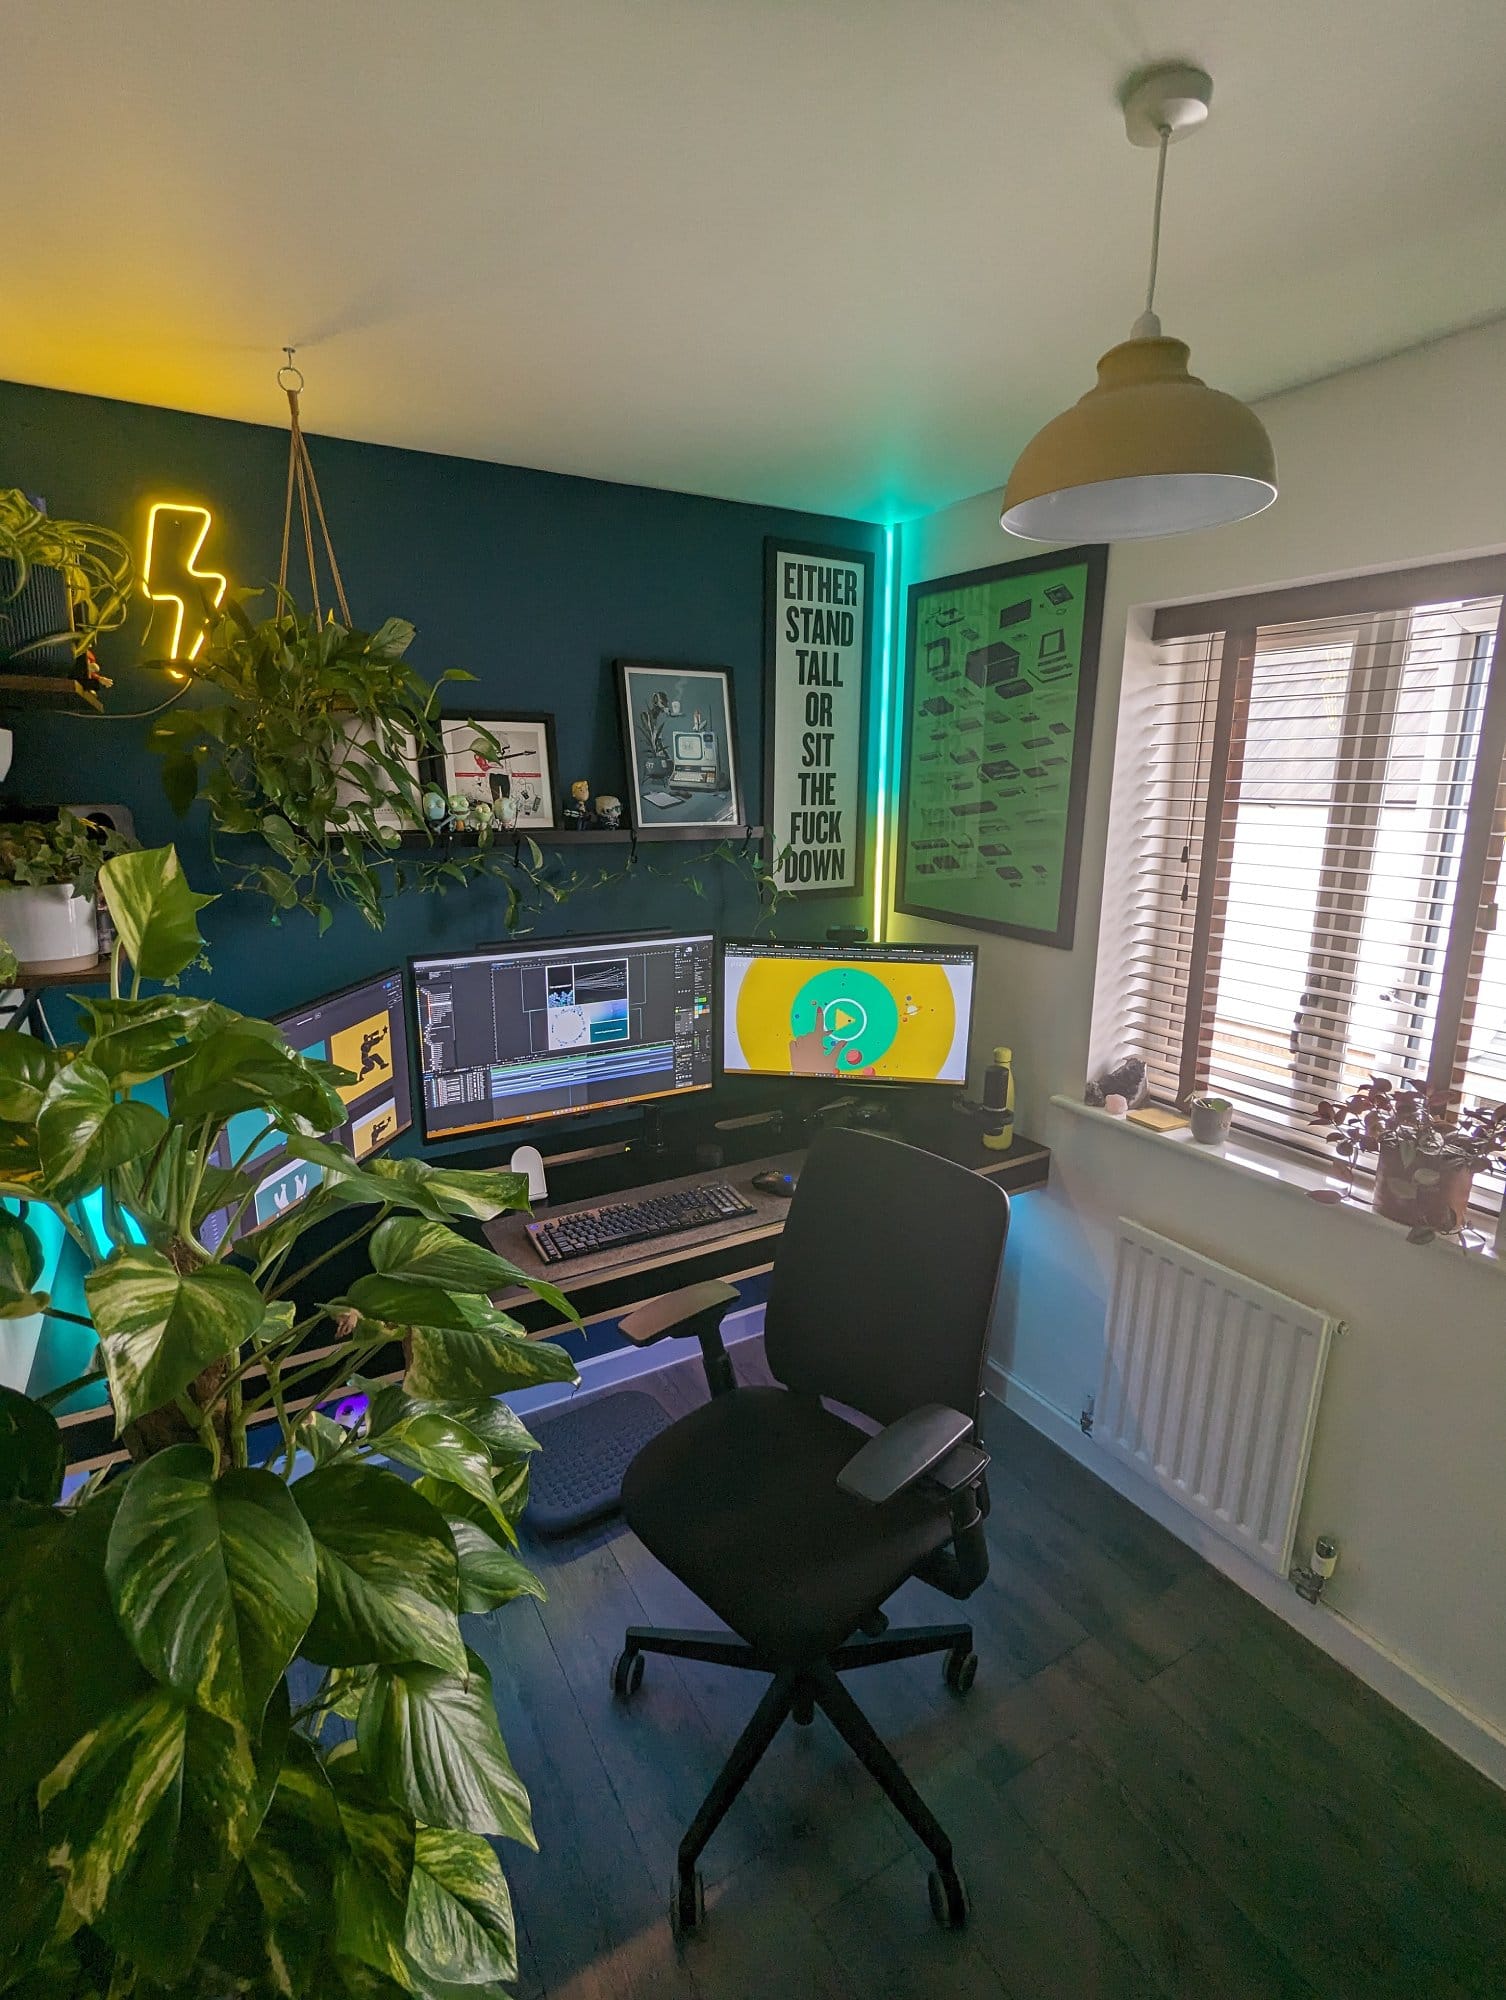 A stylish home office featuring multiple monitors on a desk, accentuated by vibrant green plants, motivational wall art, and modern lighting